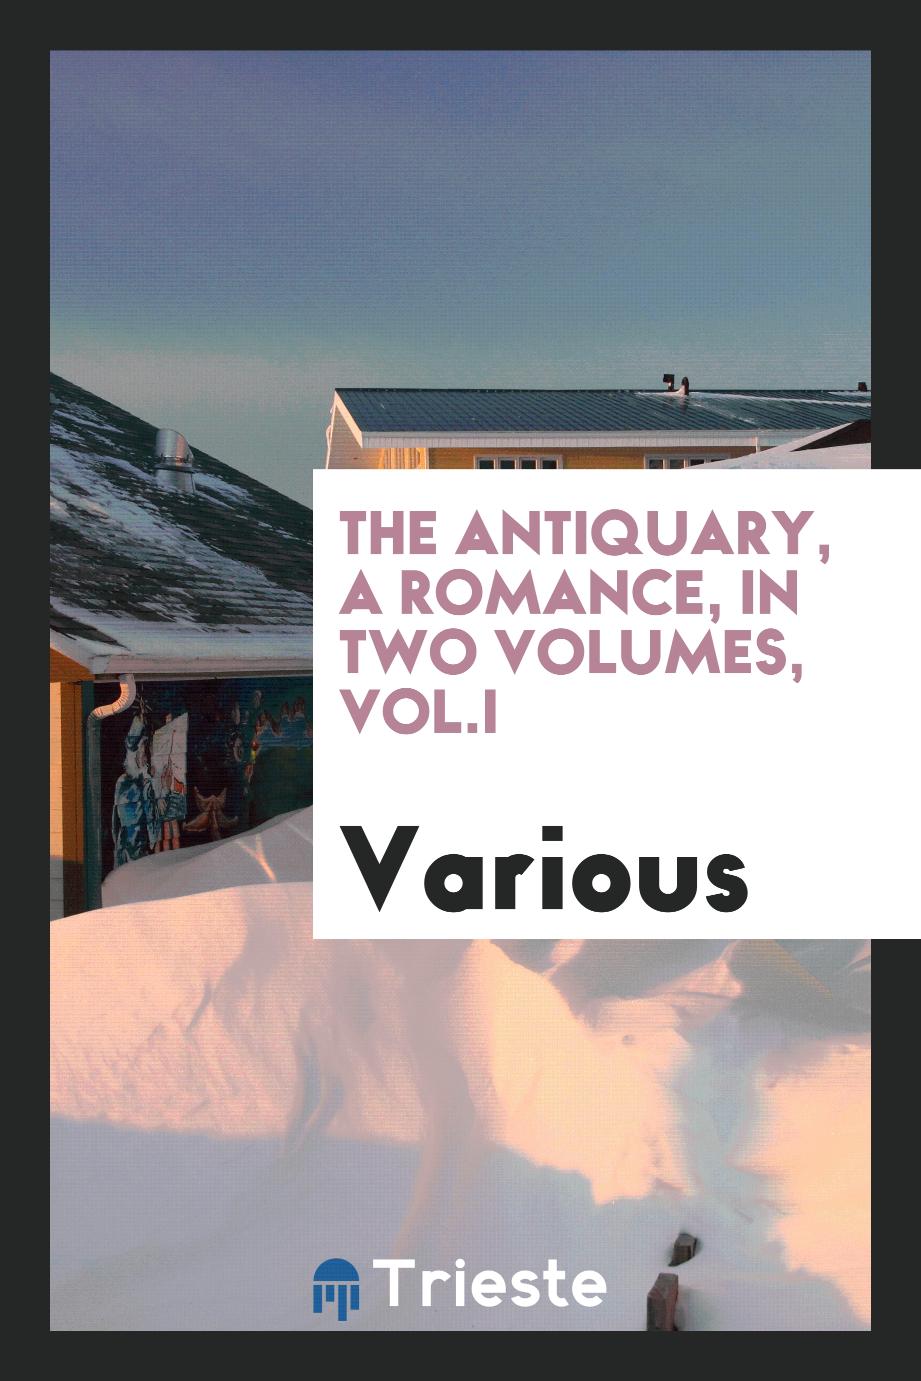 The Antiquary, a romance, in two volumes, Vol.I